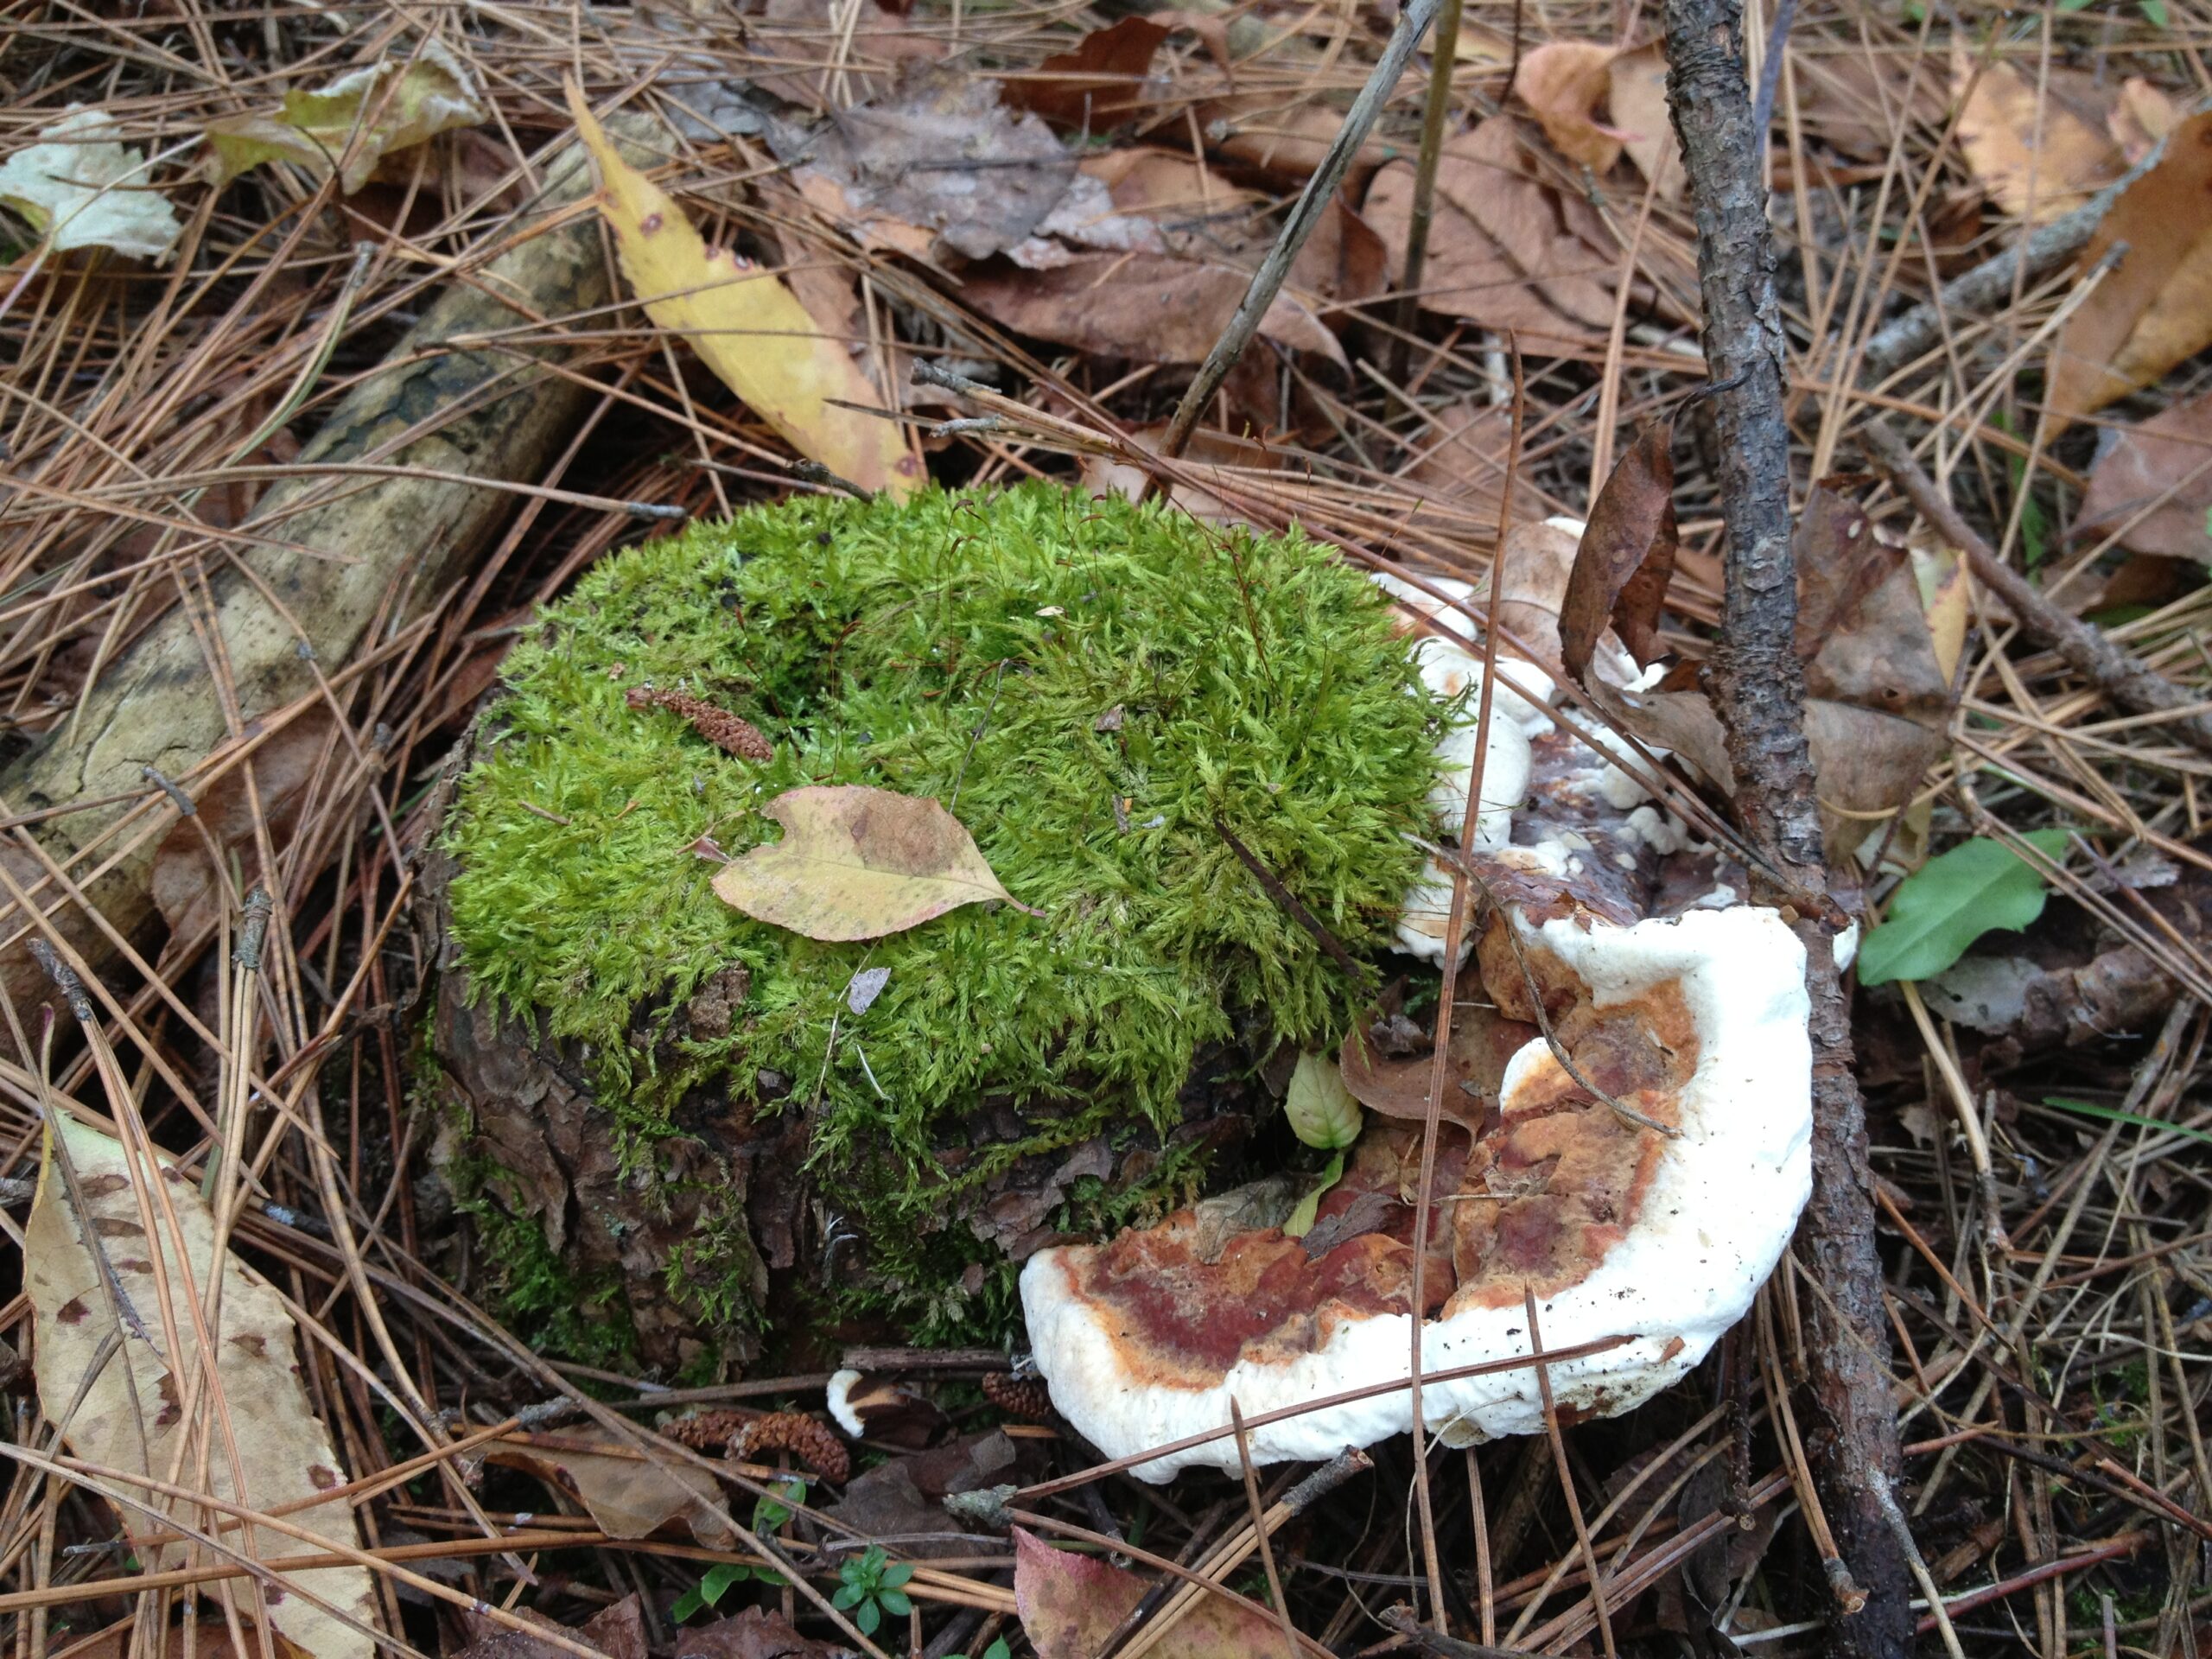 A pine stump with a Heterobasidion root disease fruit body with old brown growth in the center and new, bright white growth along the edges.